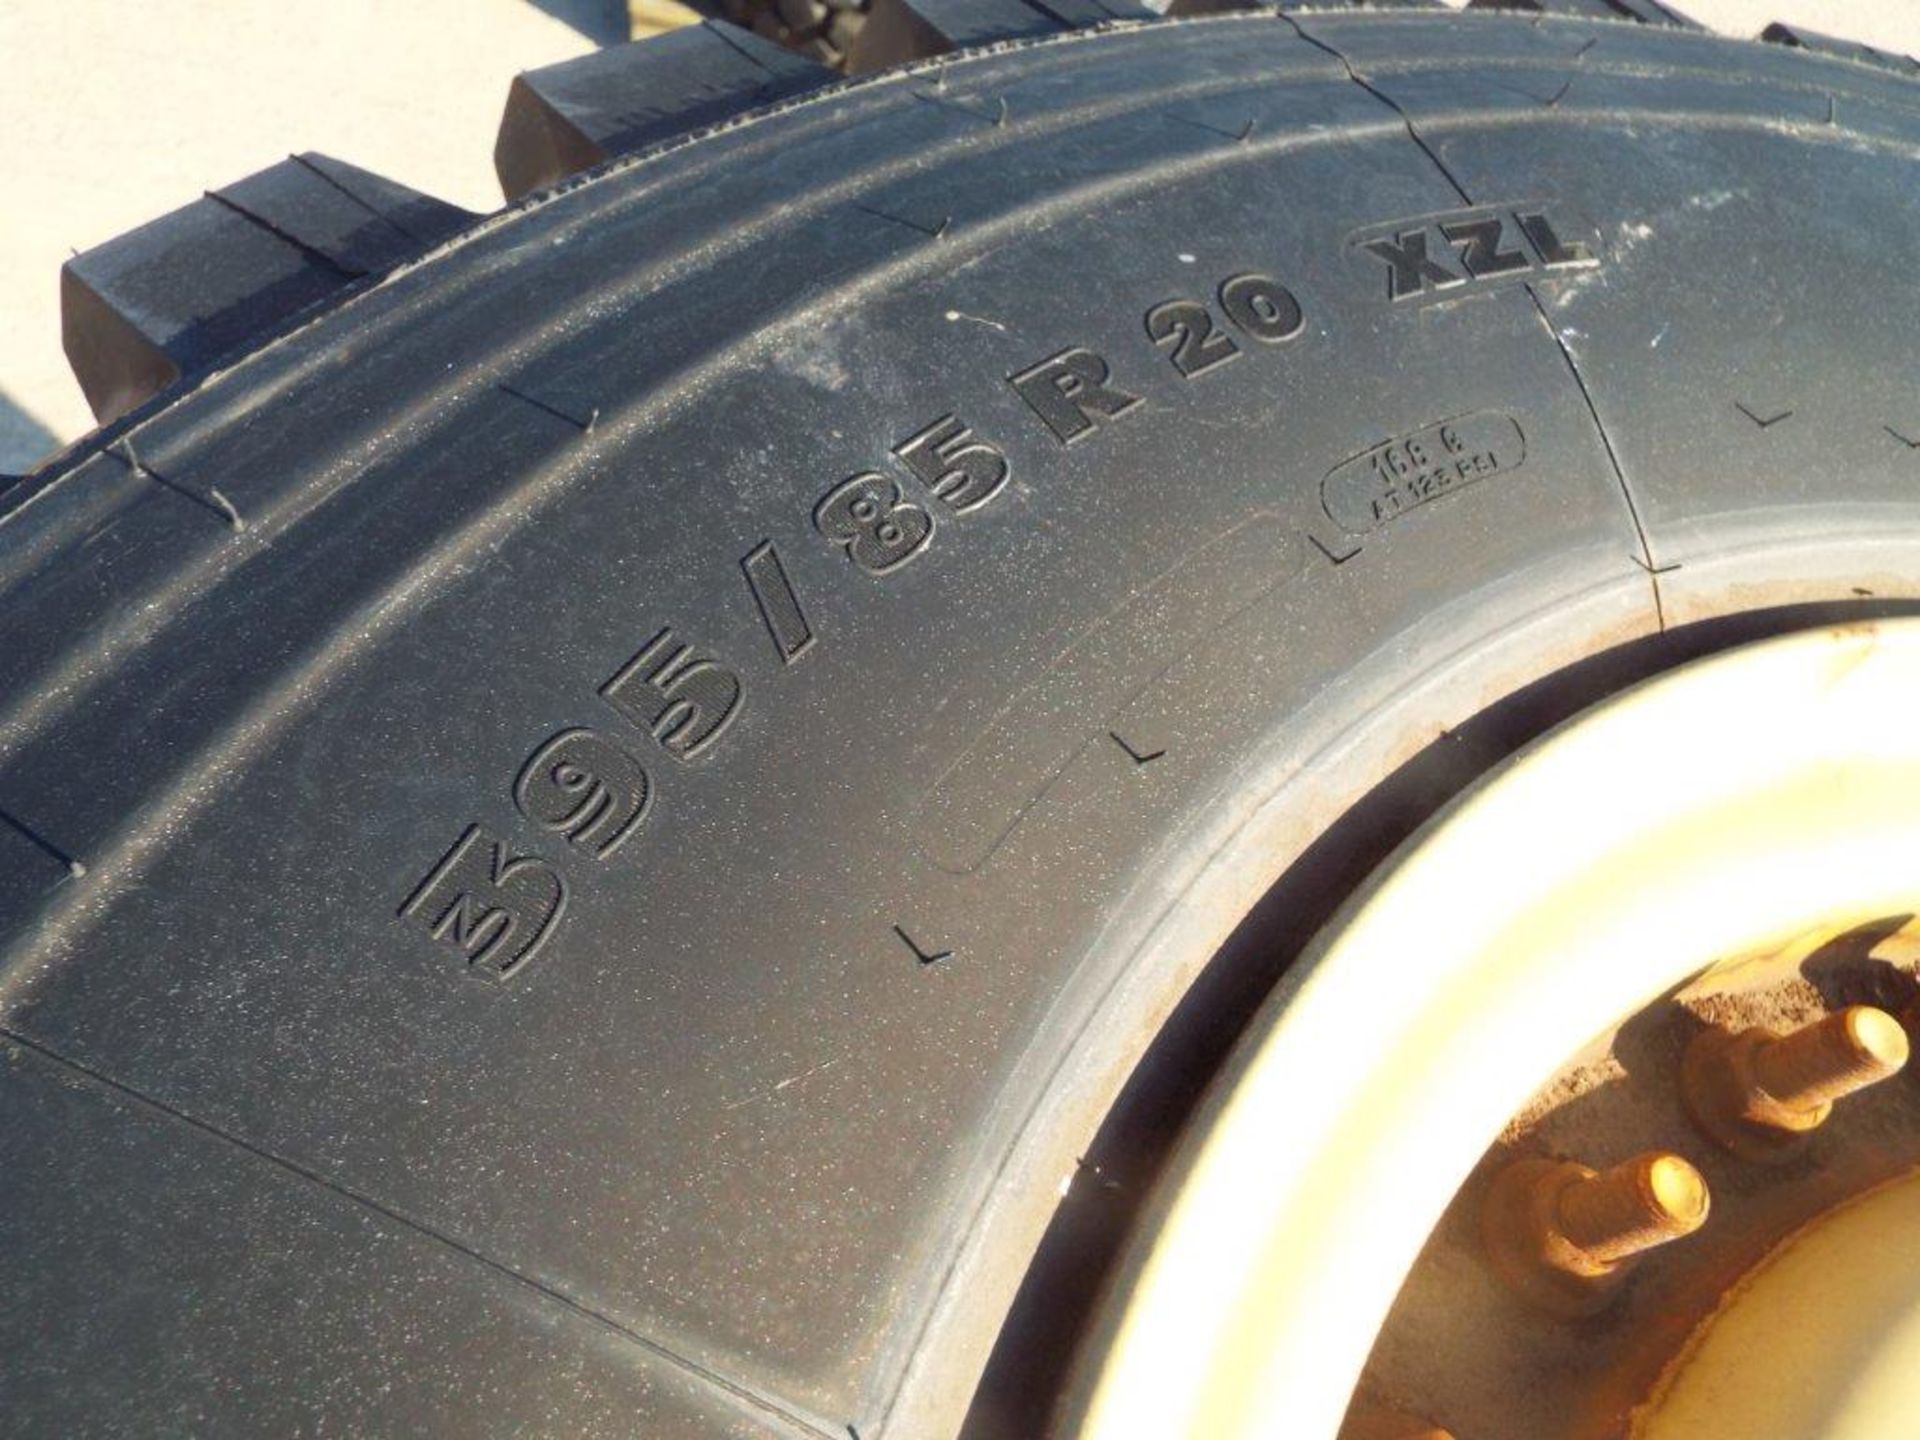 4 x Michelin XZL 395/85 R20 Tyres with 10 Stud Rims - Image 7 of 9